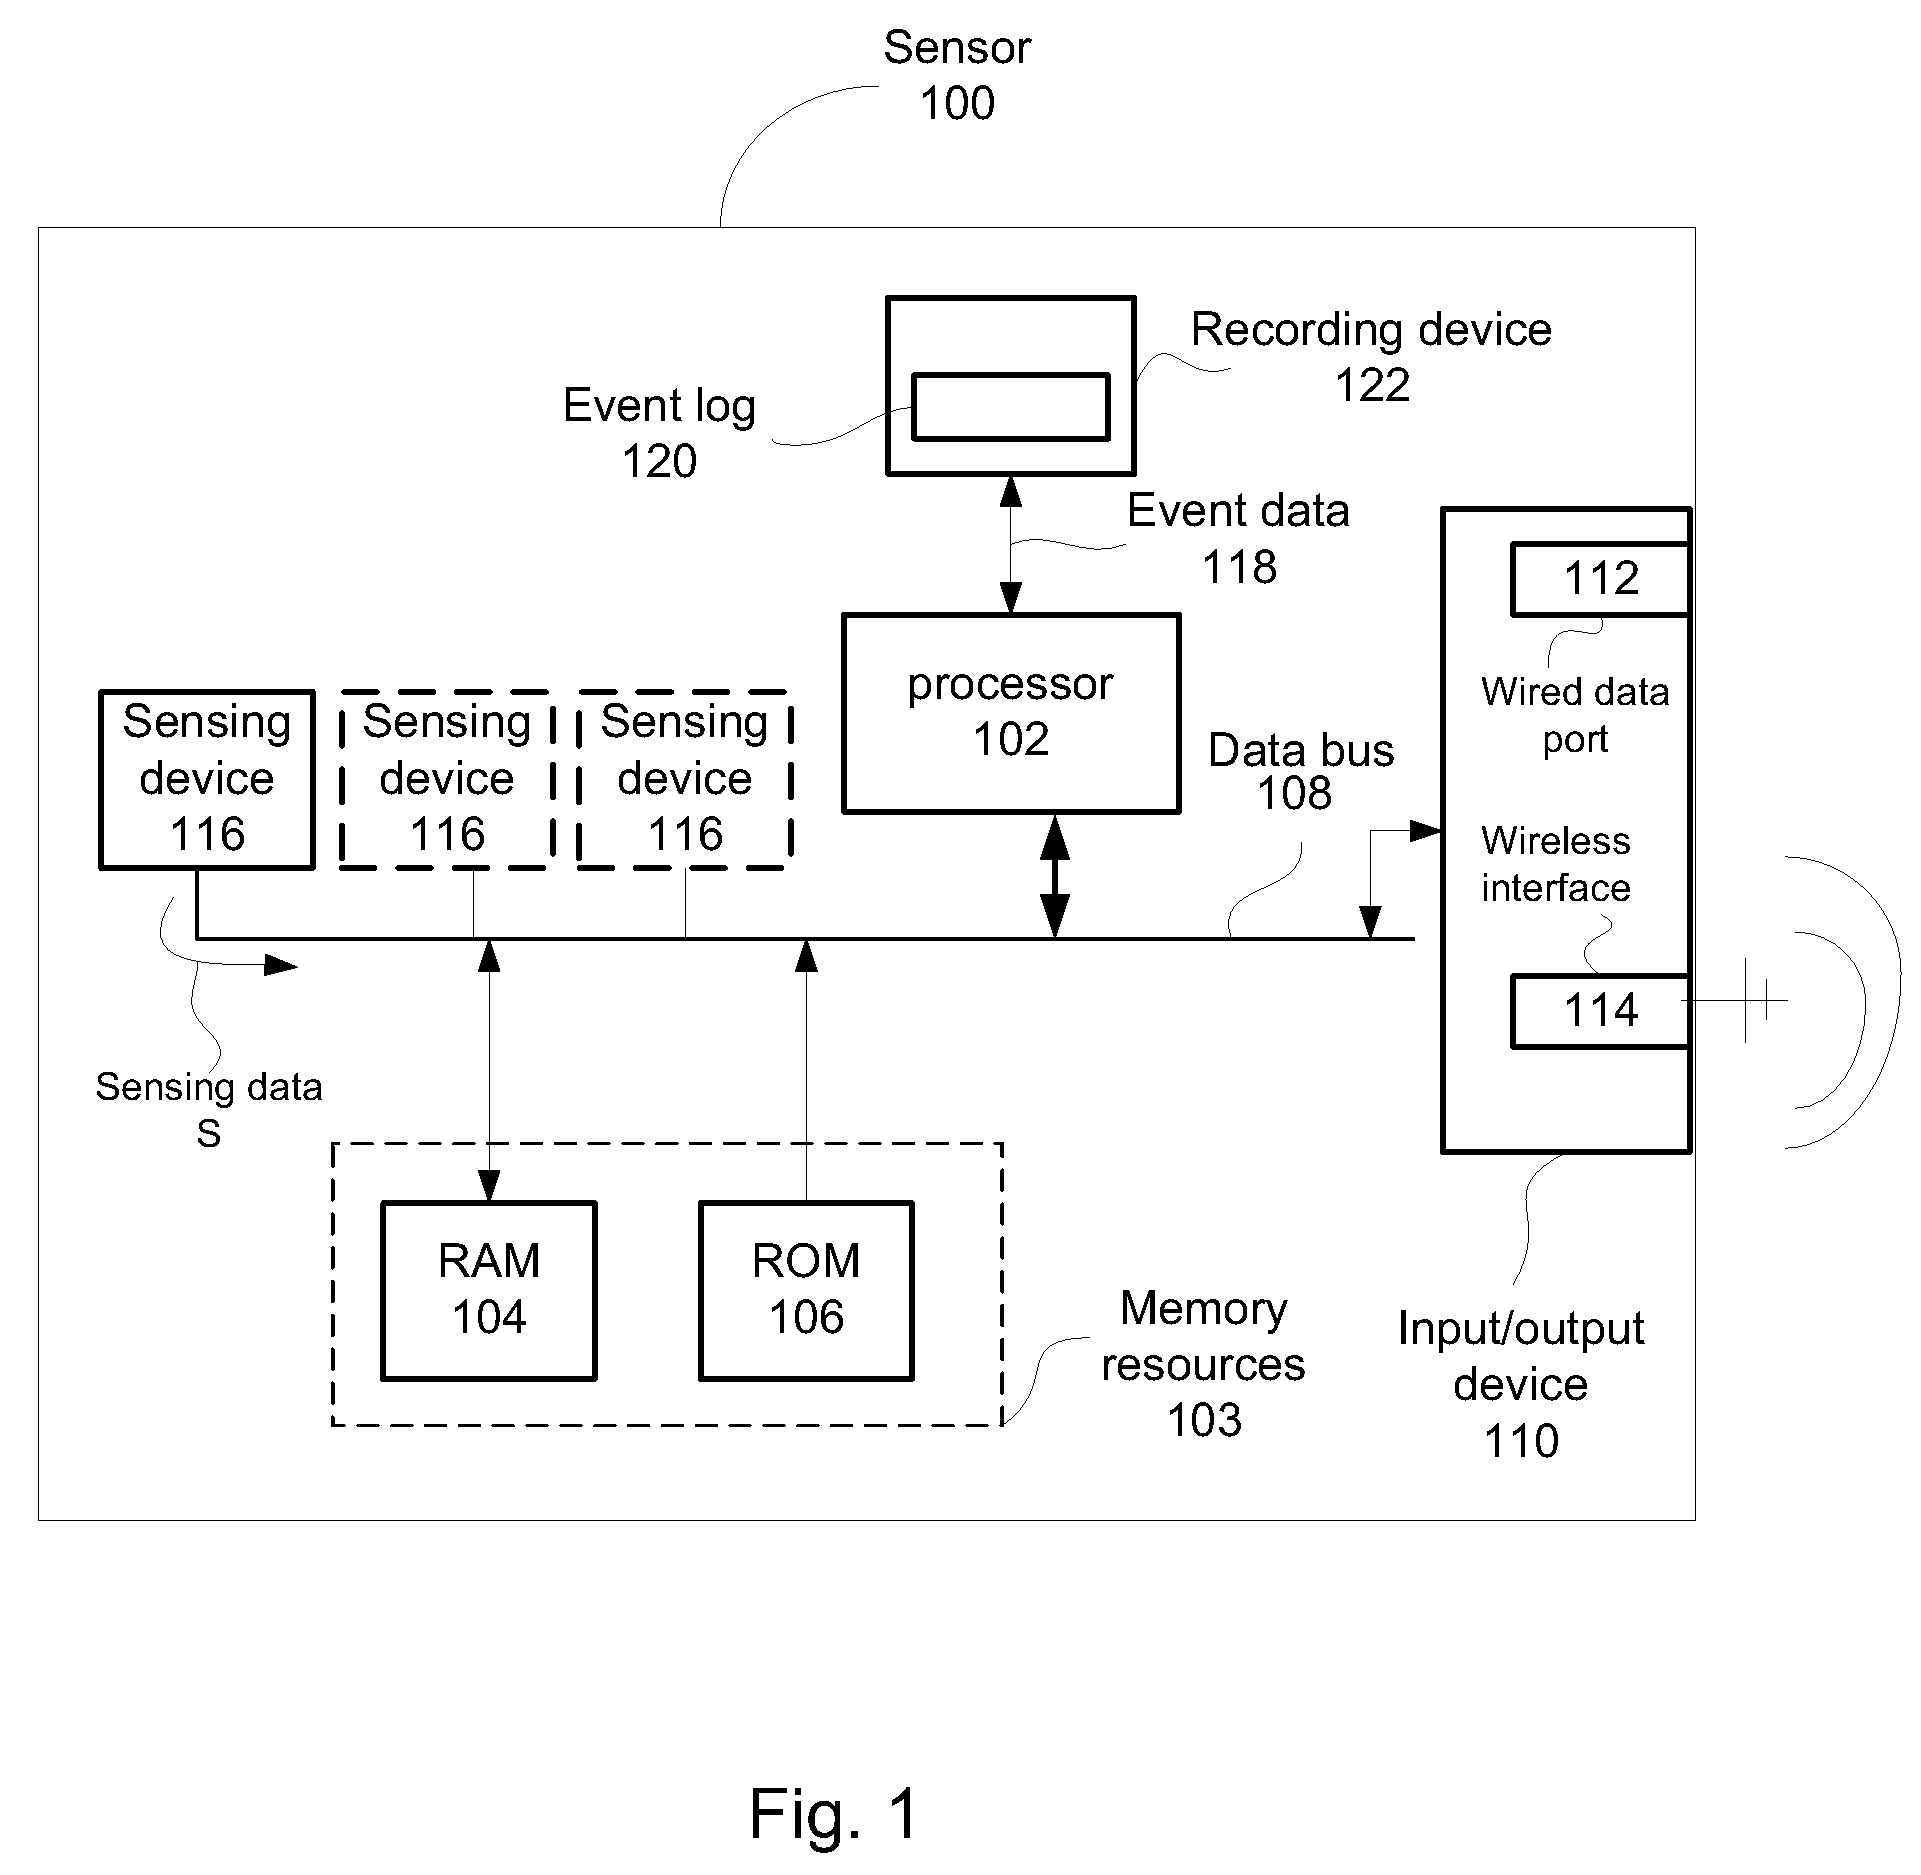 Event recorder for portable media device